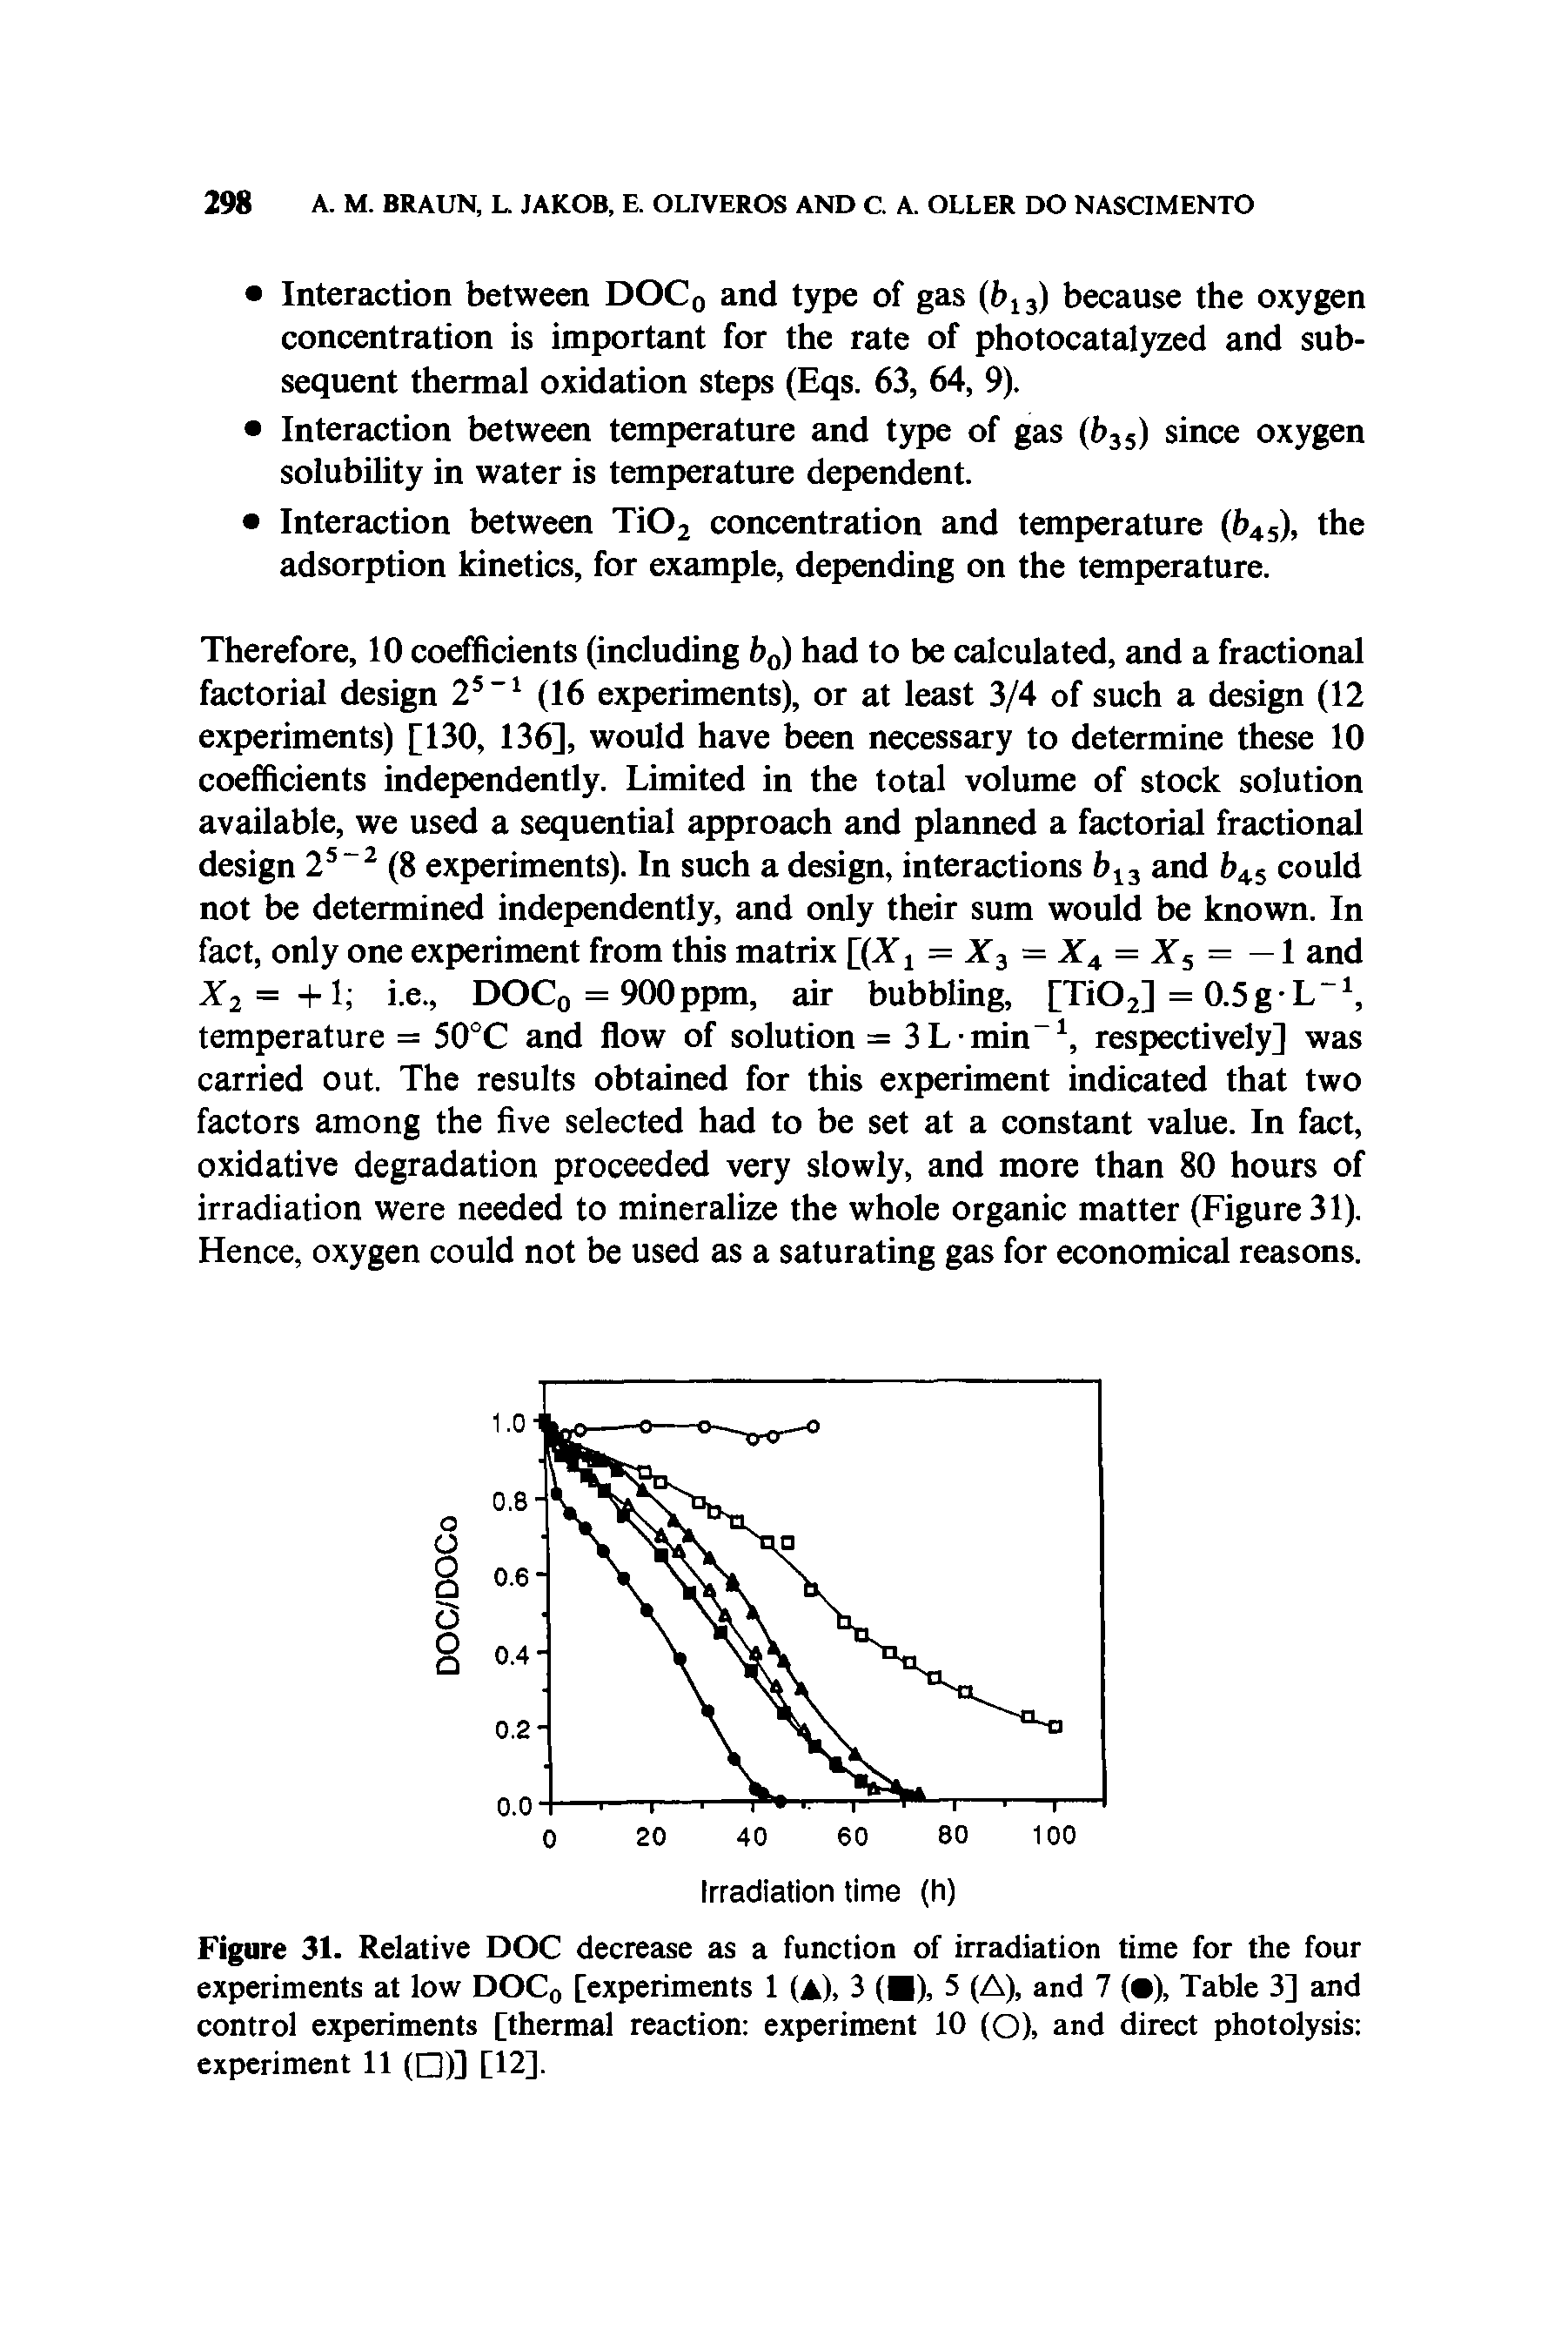 Figure 31. Relative DOC decrease as a function of irradiation time for the four experiments at low DOC0 [experiments 1 (A), 3 ( ), 5 (A), and 7 ( ), Table 3] and control experiments [thermal reaction experiment 10 (O), and direct photolysis experiment 11 ( )] [12].